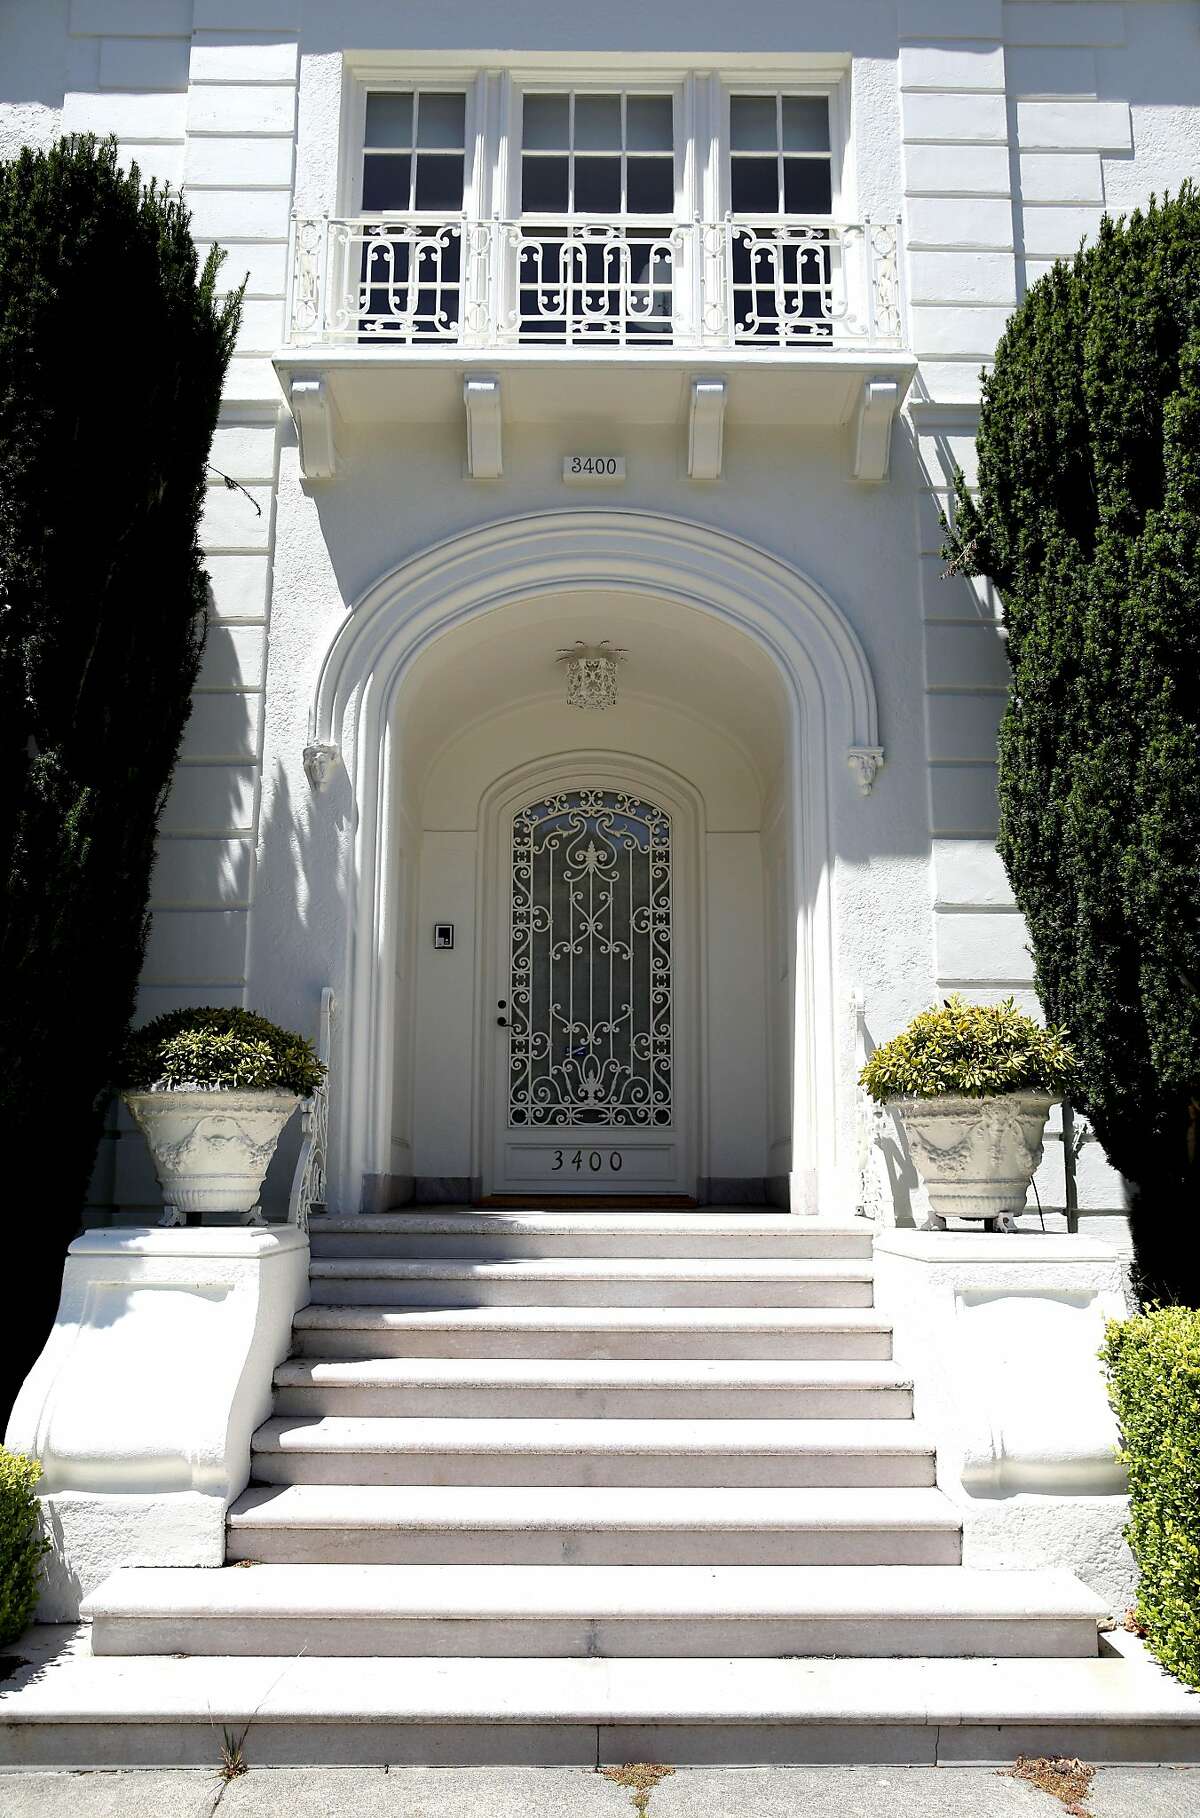 Exterior of house located at 3400 Washington St. in San Francisco, Calif., on Tuesday, July 16, 2019. The 8,700-square-foot house is worth $15 million. The U.S. government has been planning to mothball it because it is too expensive to maintain, but the couple who lives there has refused to leave.